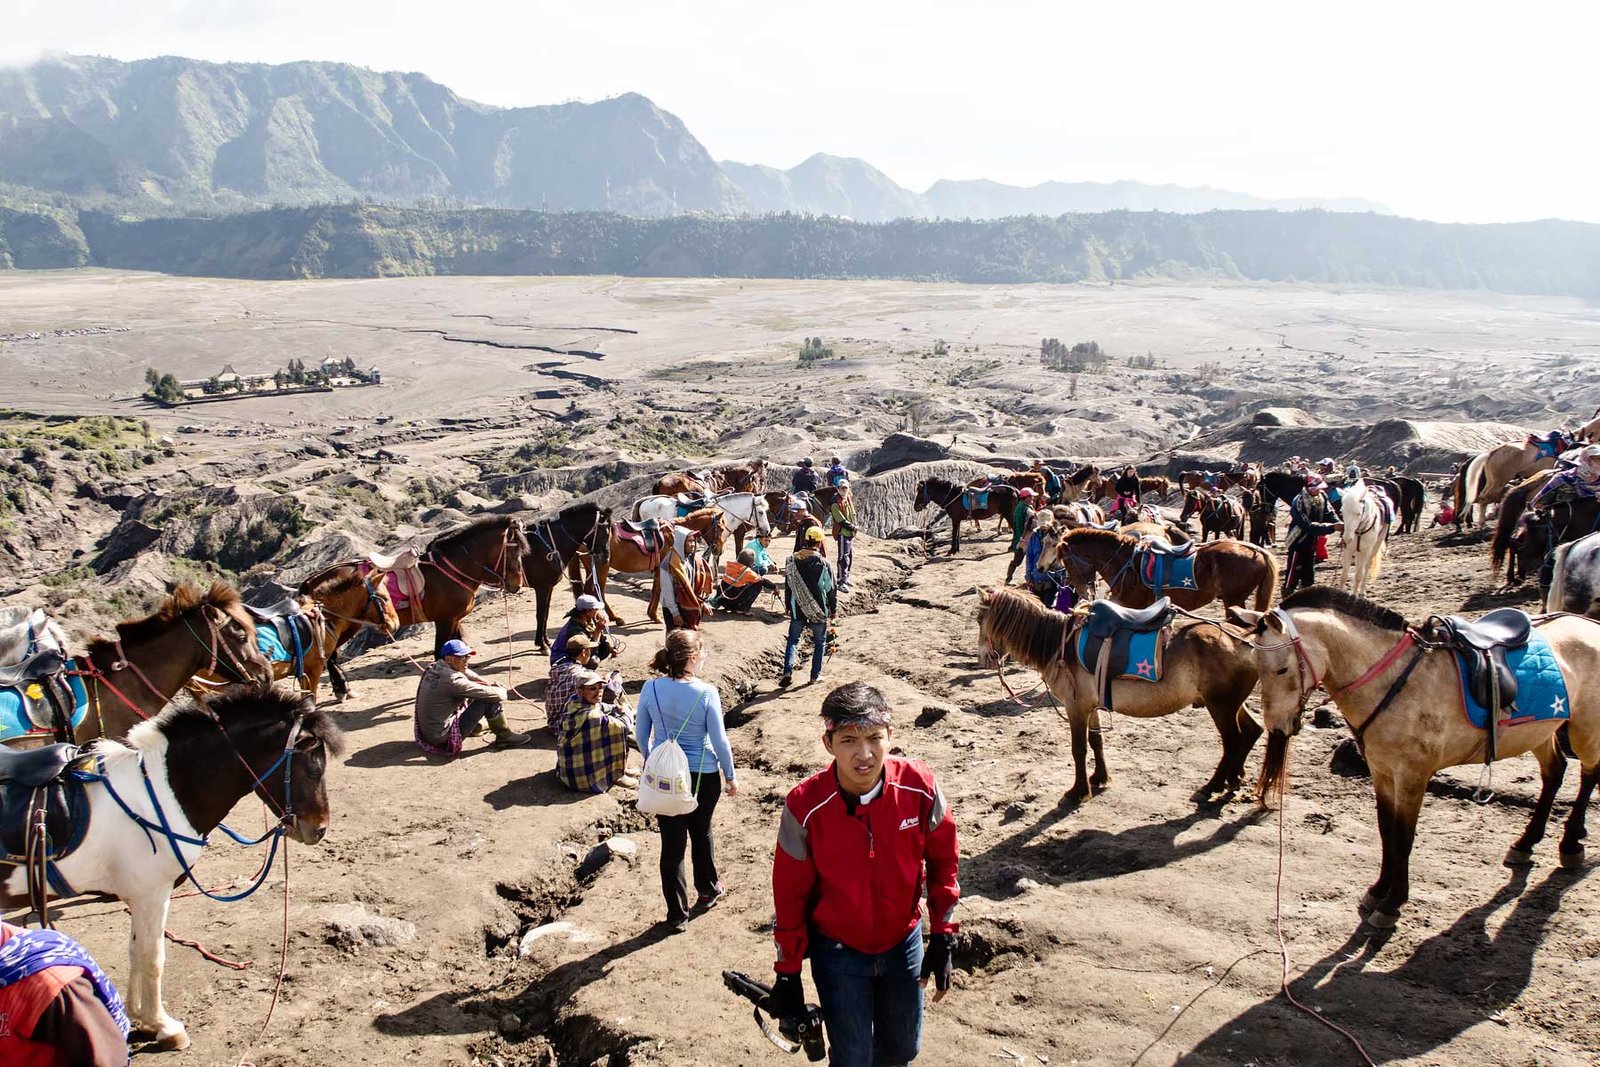 Horses at Mount Bromo. Read the review of my Mount Bromo Tour: Climbing an active volcano in East Java, Indonesia on Urban Pixxels.